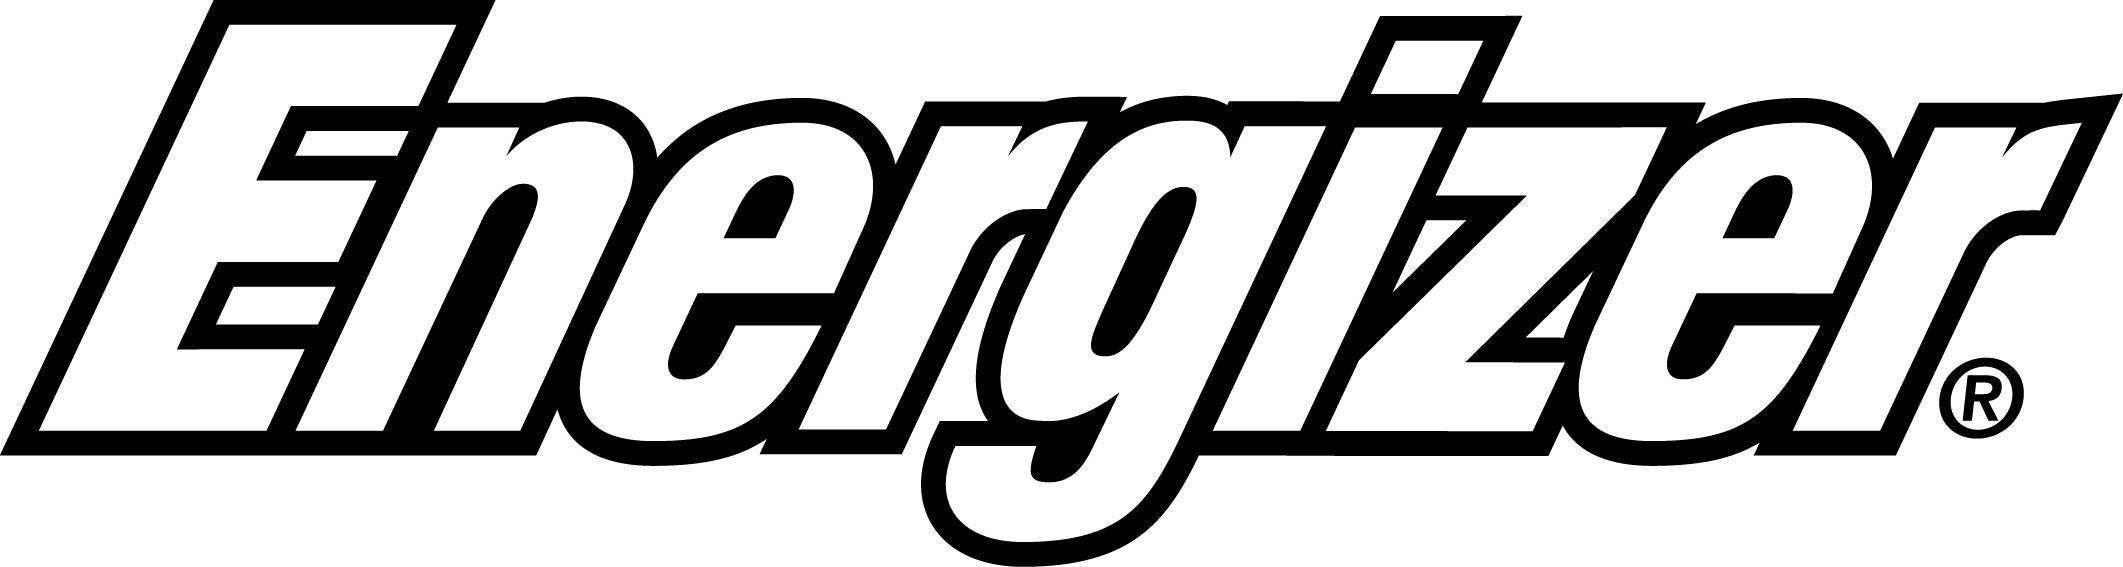 Avenir Telecom, A French Company, Has Forayed Into Indian Market And Launched Today Range Of Mobile Accessories Under The Popular Brand Of Energizer. - Energizer, Transparent background PNG HD thumbnail